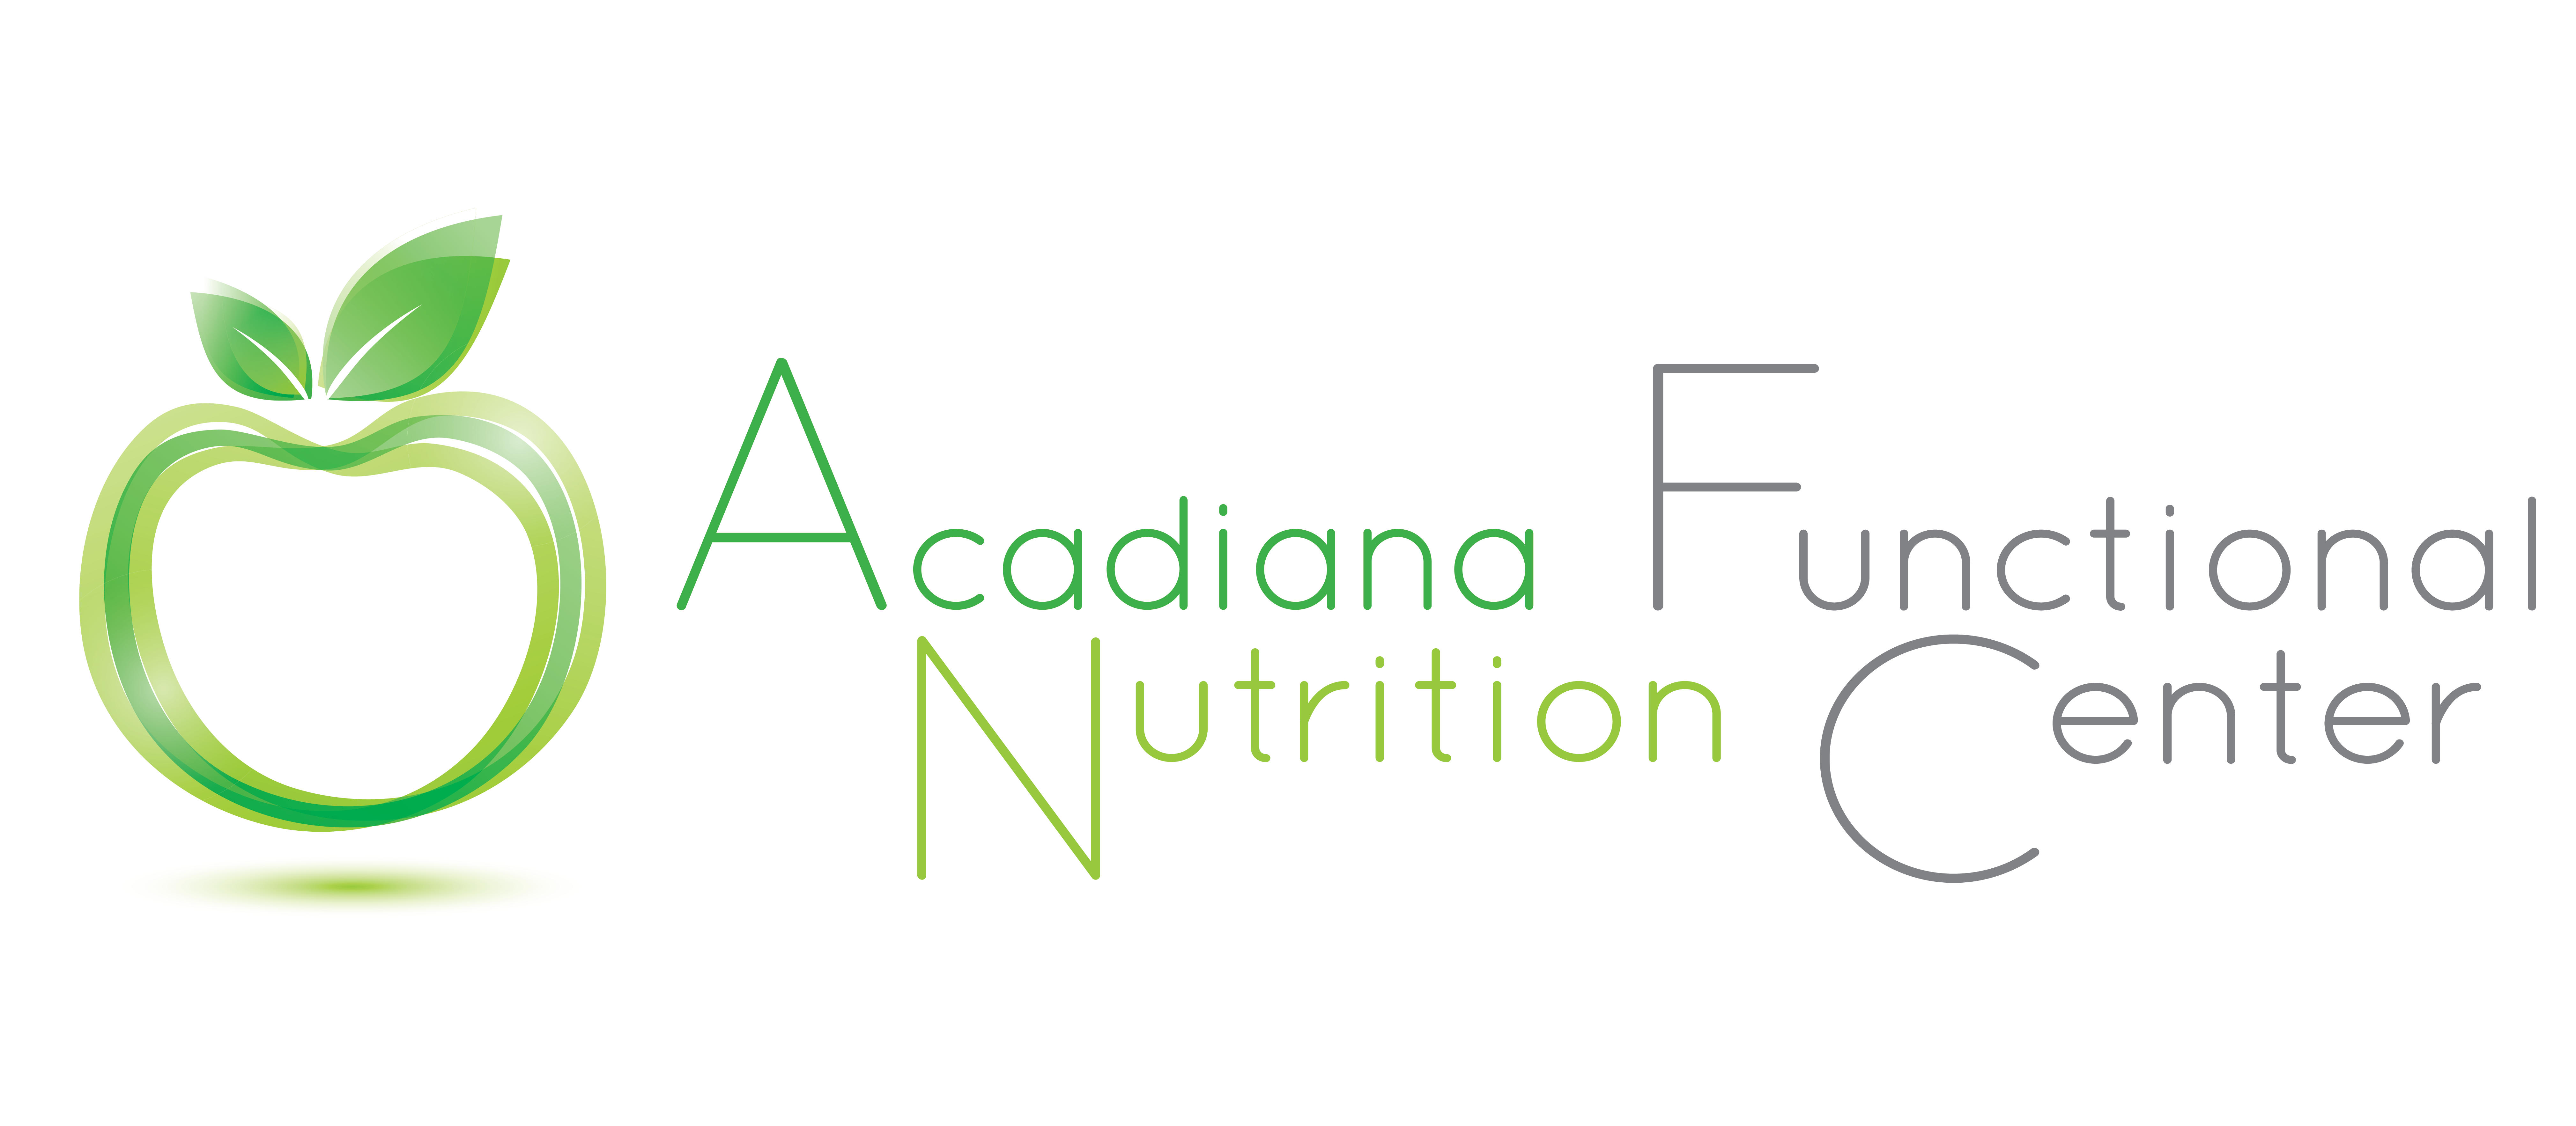 Acadiana Functional Nutrition Center